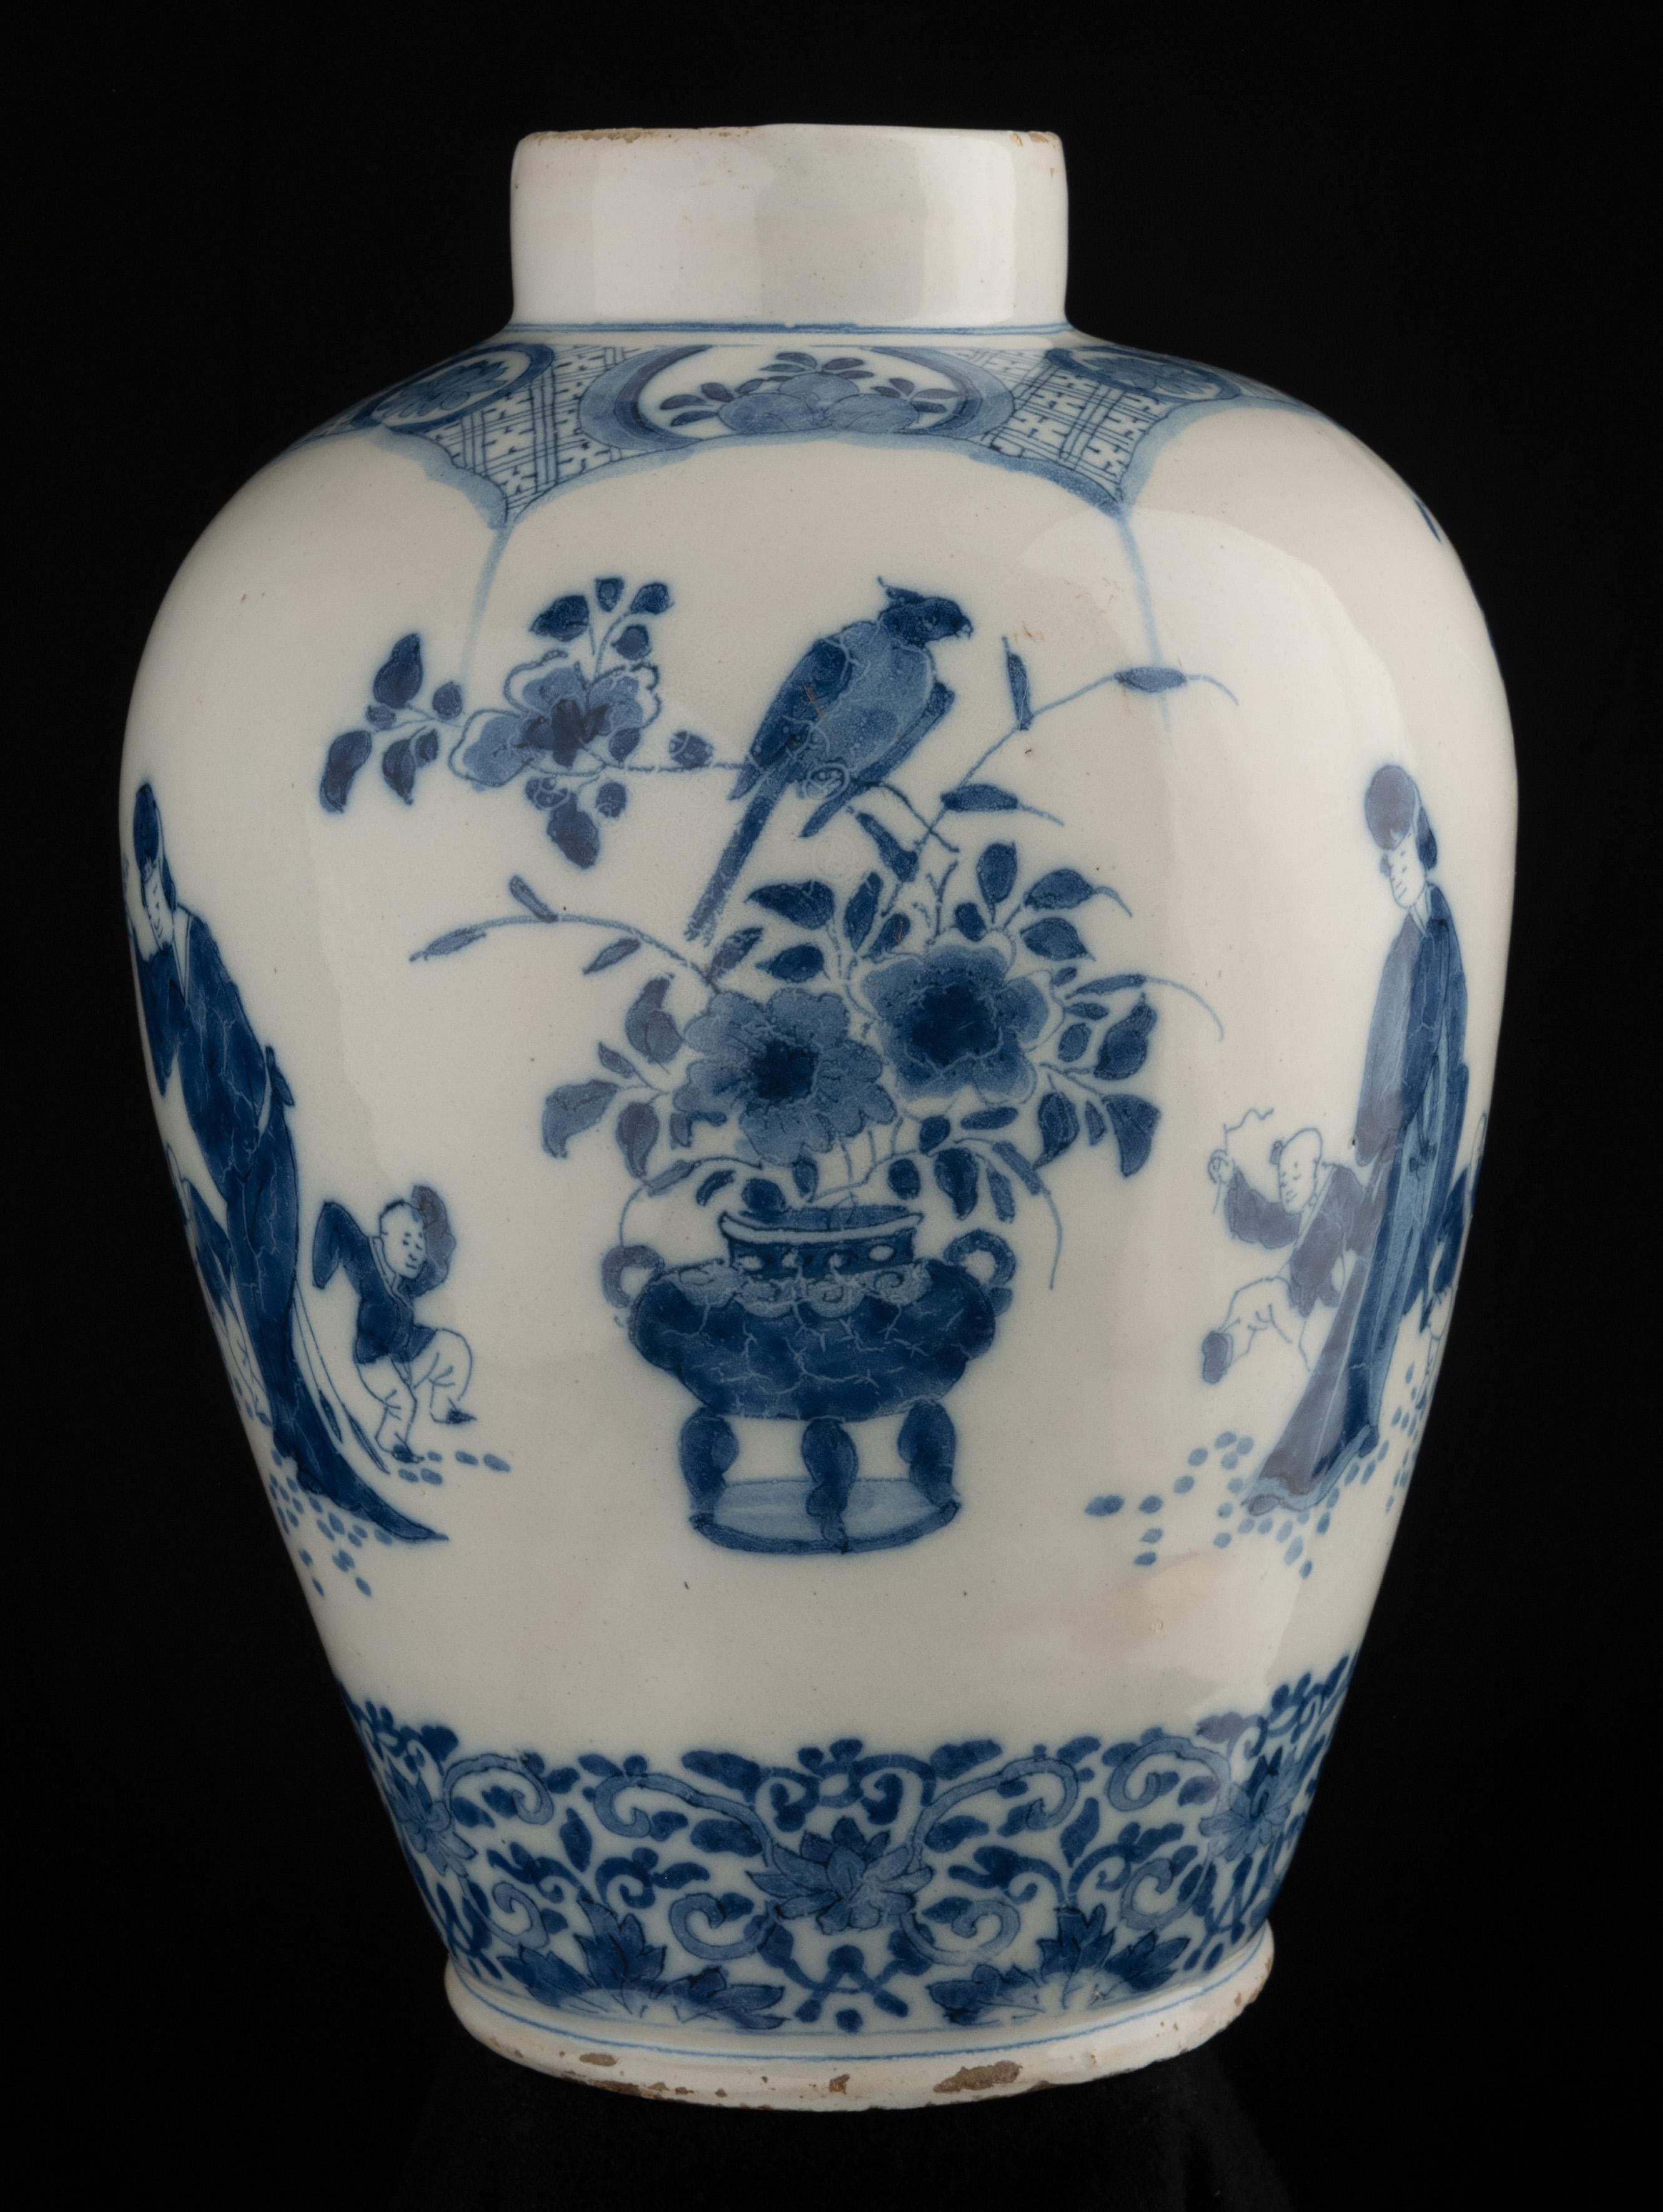 Blue and white chinoiserie jar
Delft, 1700-1720
The jar has a narrow straight neck and is painted in blue with a chinoiserie decor. Around the belly are three scenes of a Chinese woman with two dancing children. Interspersed are three different